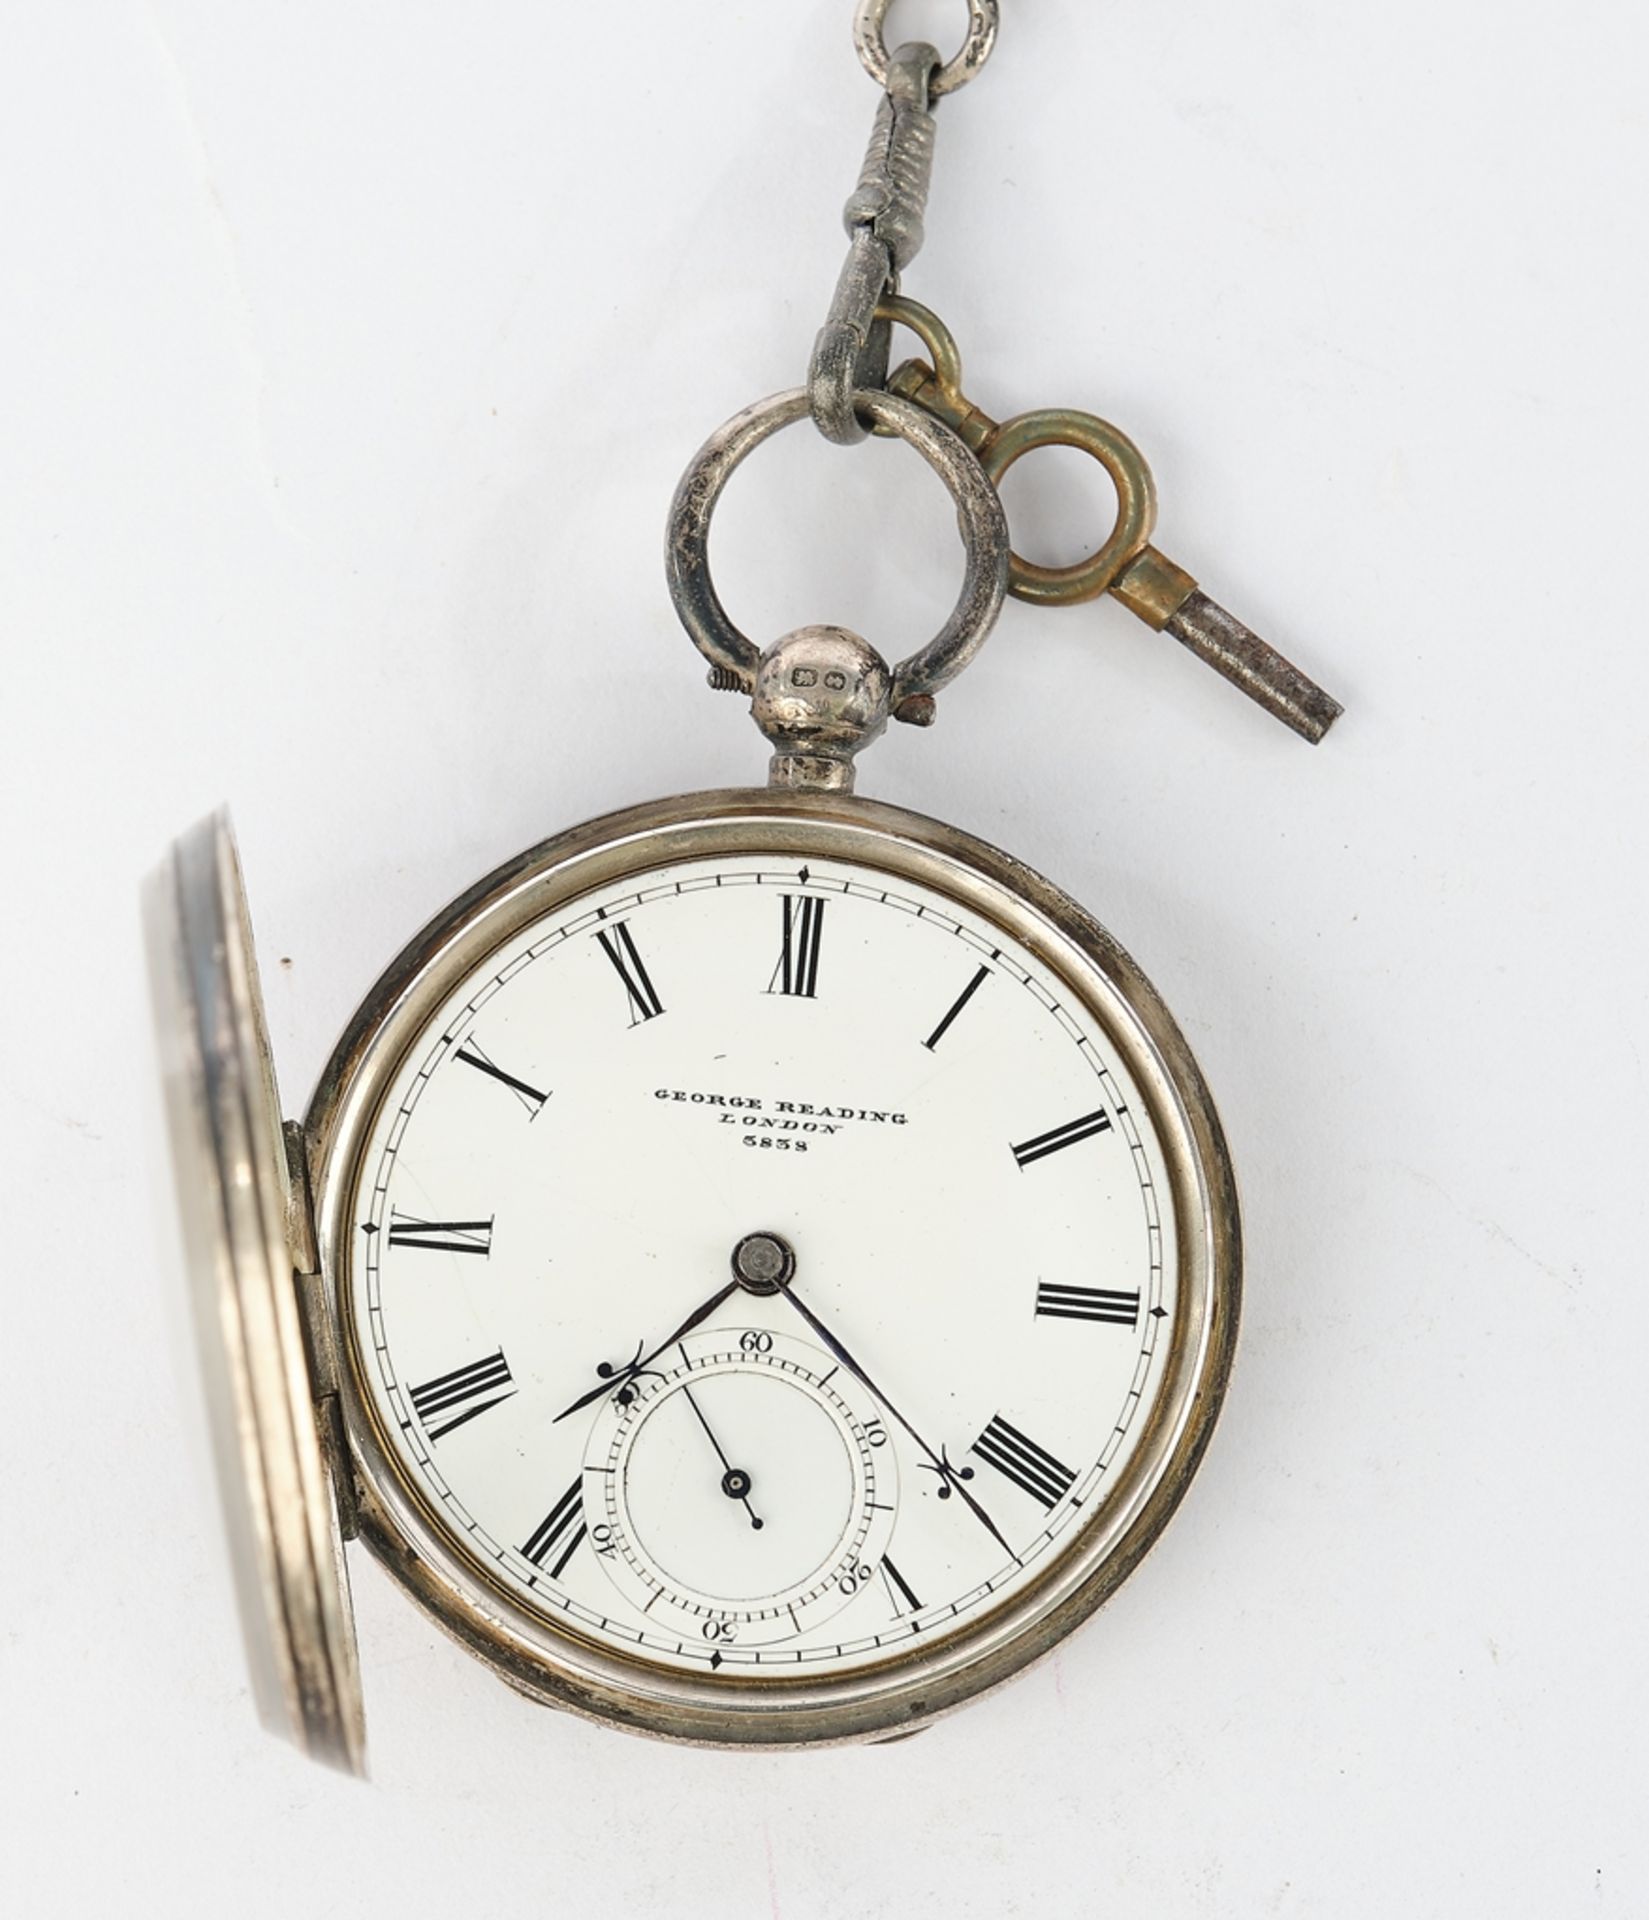 Spindle pocket watch, London, probably 1893, silver case, white enamelled dial sign. "George Readin - Image 4 of 6